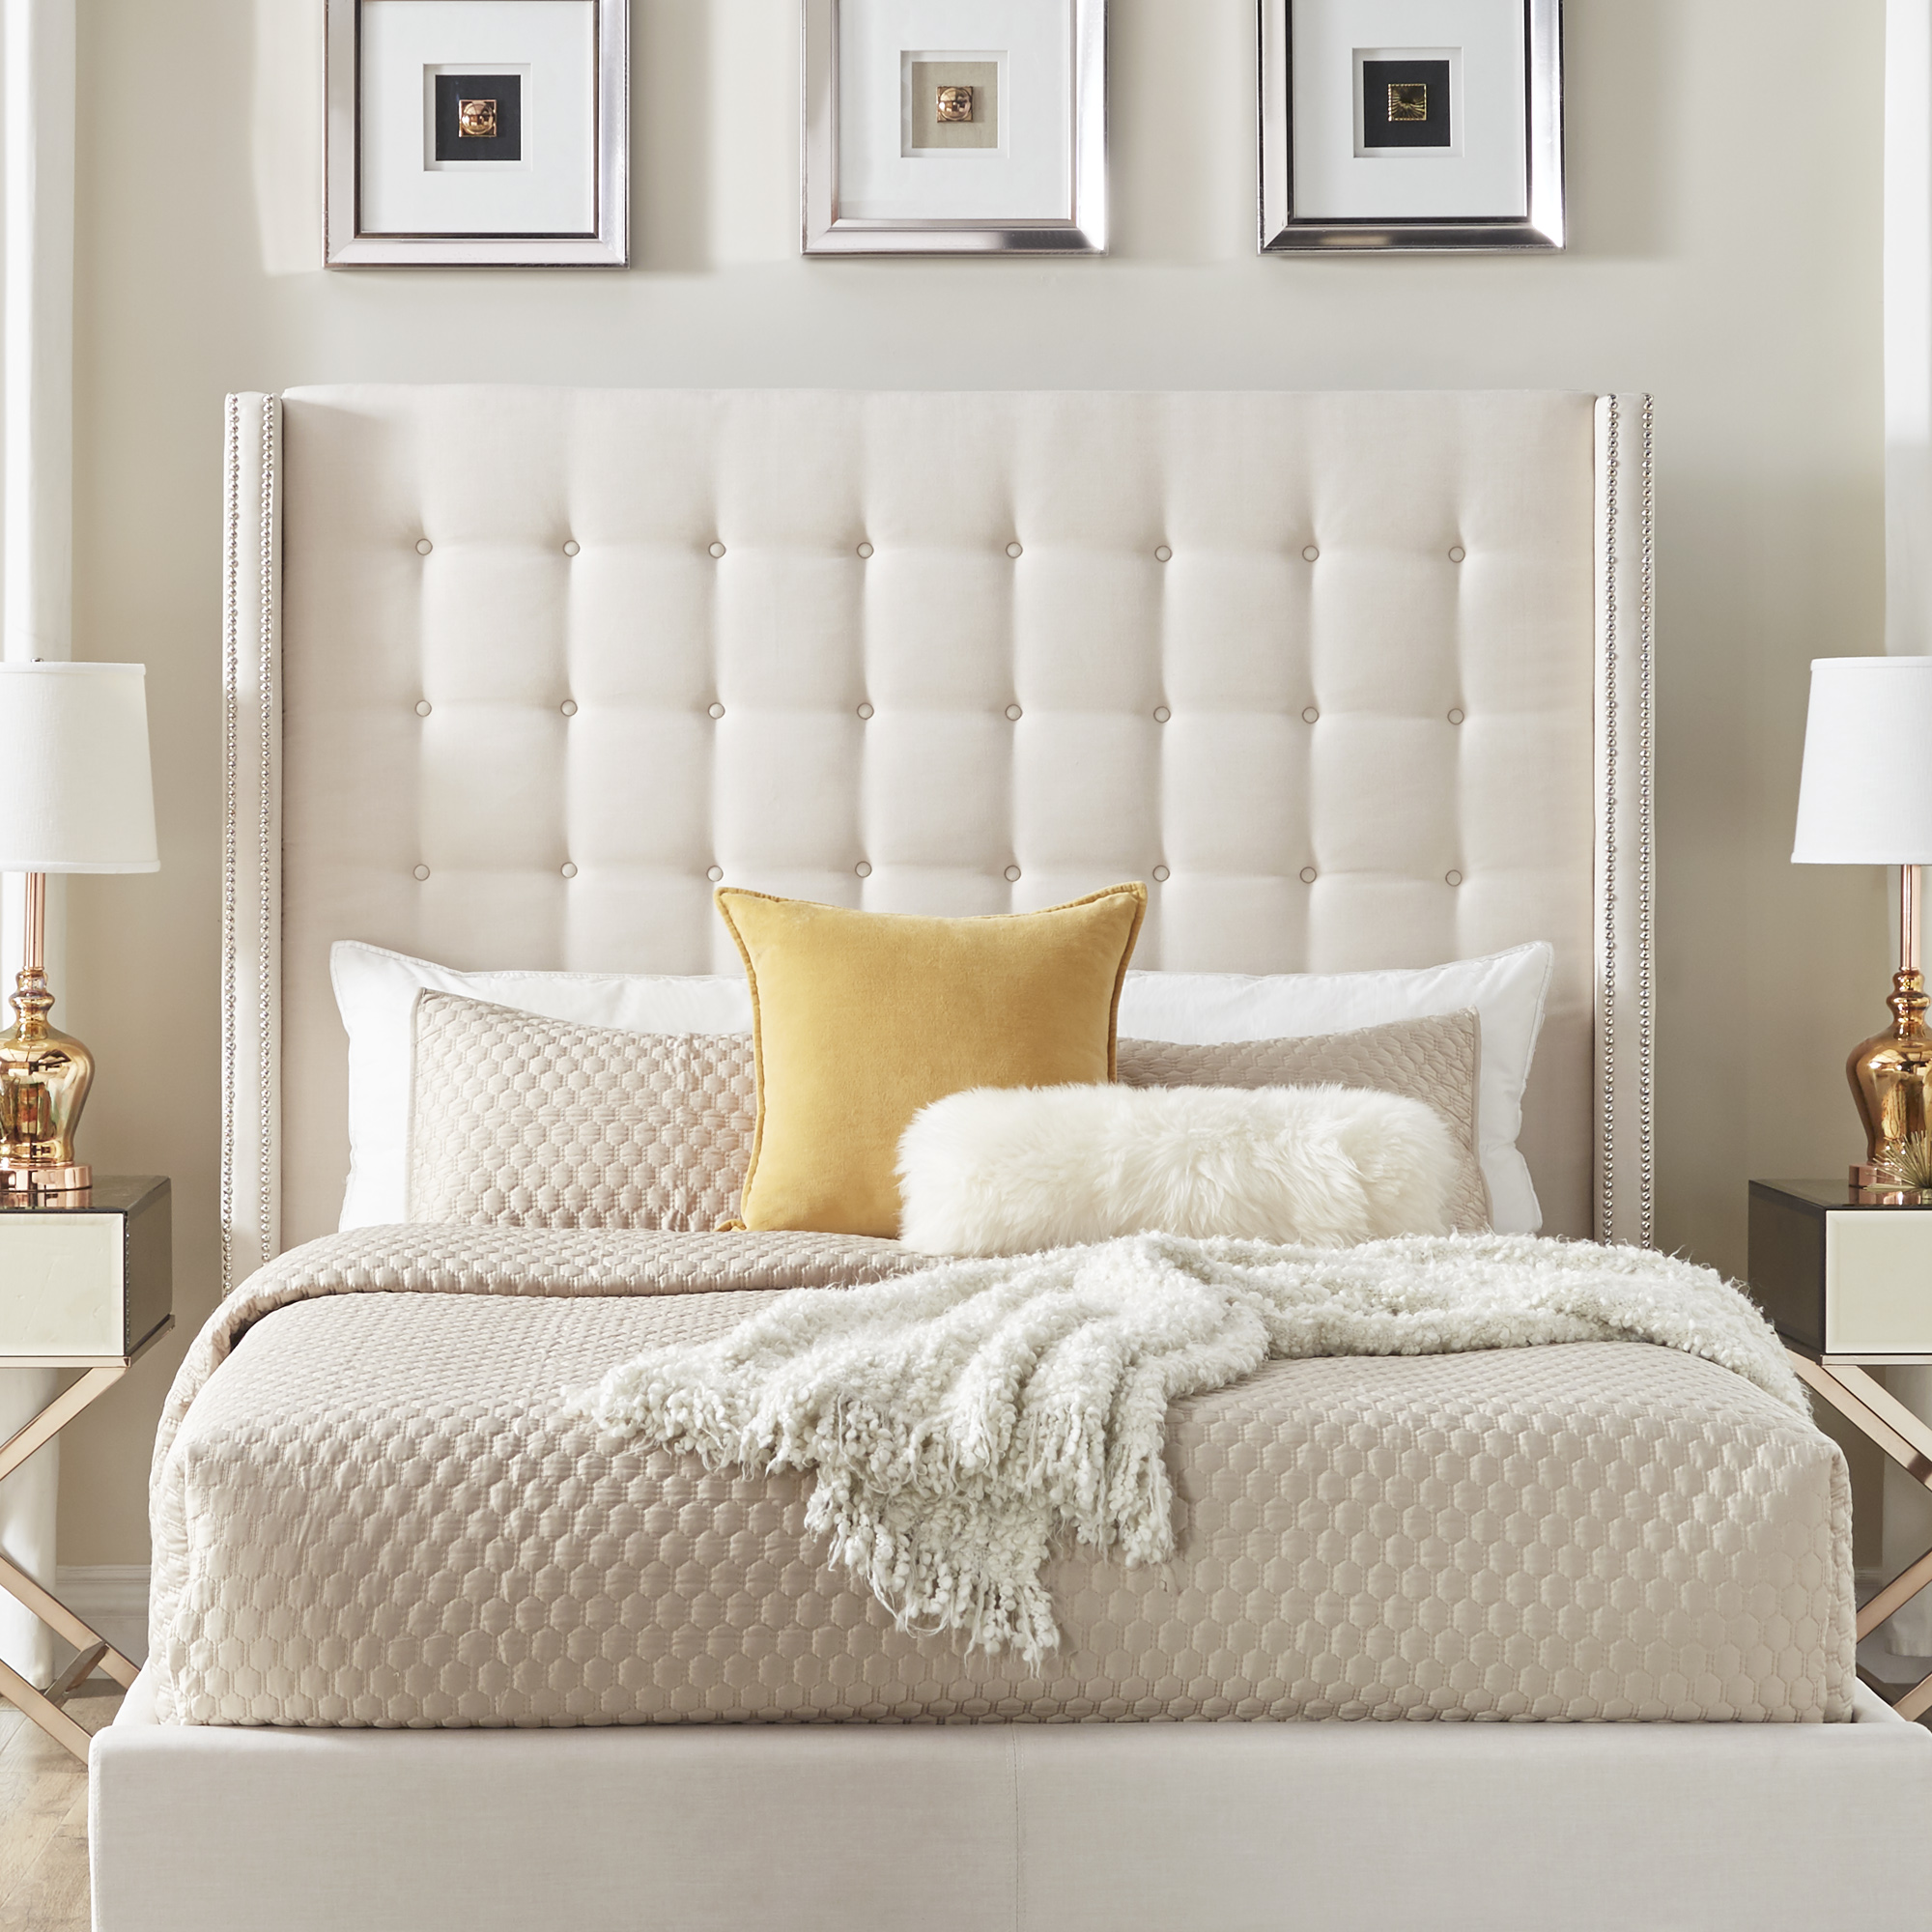 This blog is going to show you how to make your guests feel right at home. Pictured here is the Button Tufted Nailhead Trim Wingback Bed in beige linen upholstery from iNSPIRE Q. This bed is paired with white, yellow, and beige bedding, exuding plush comfort.